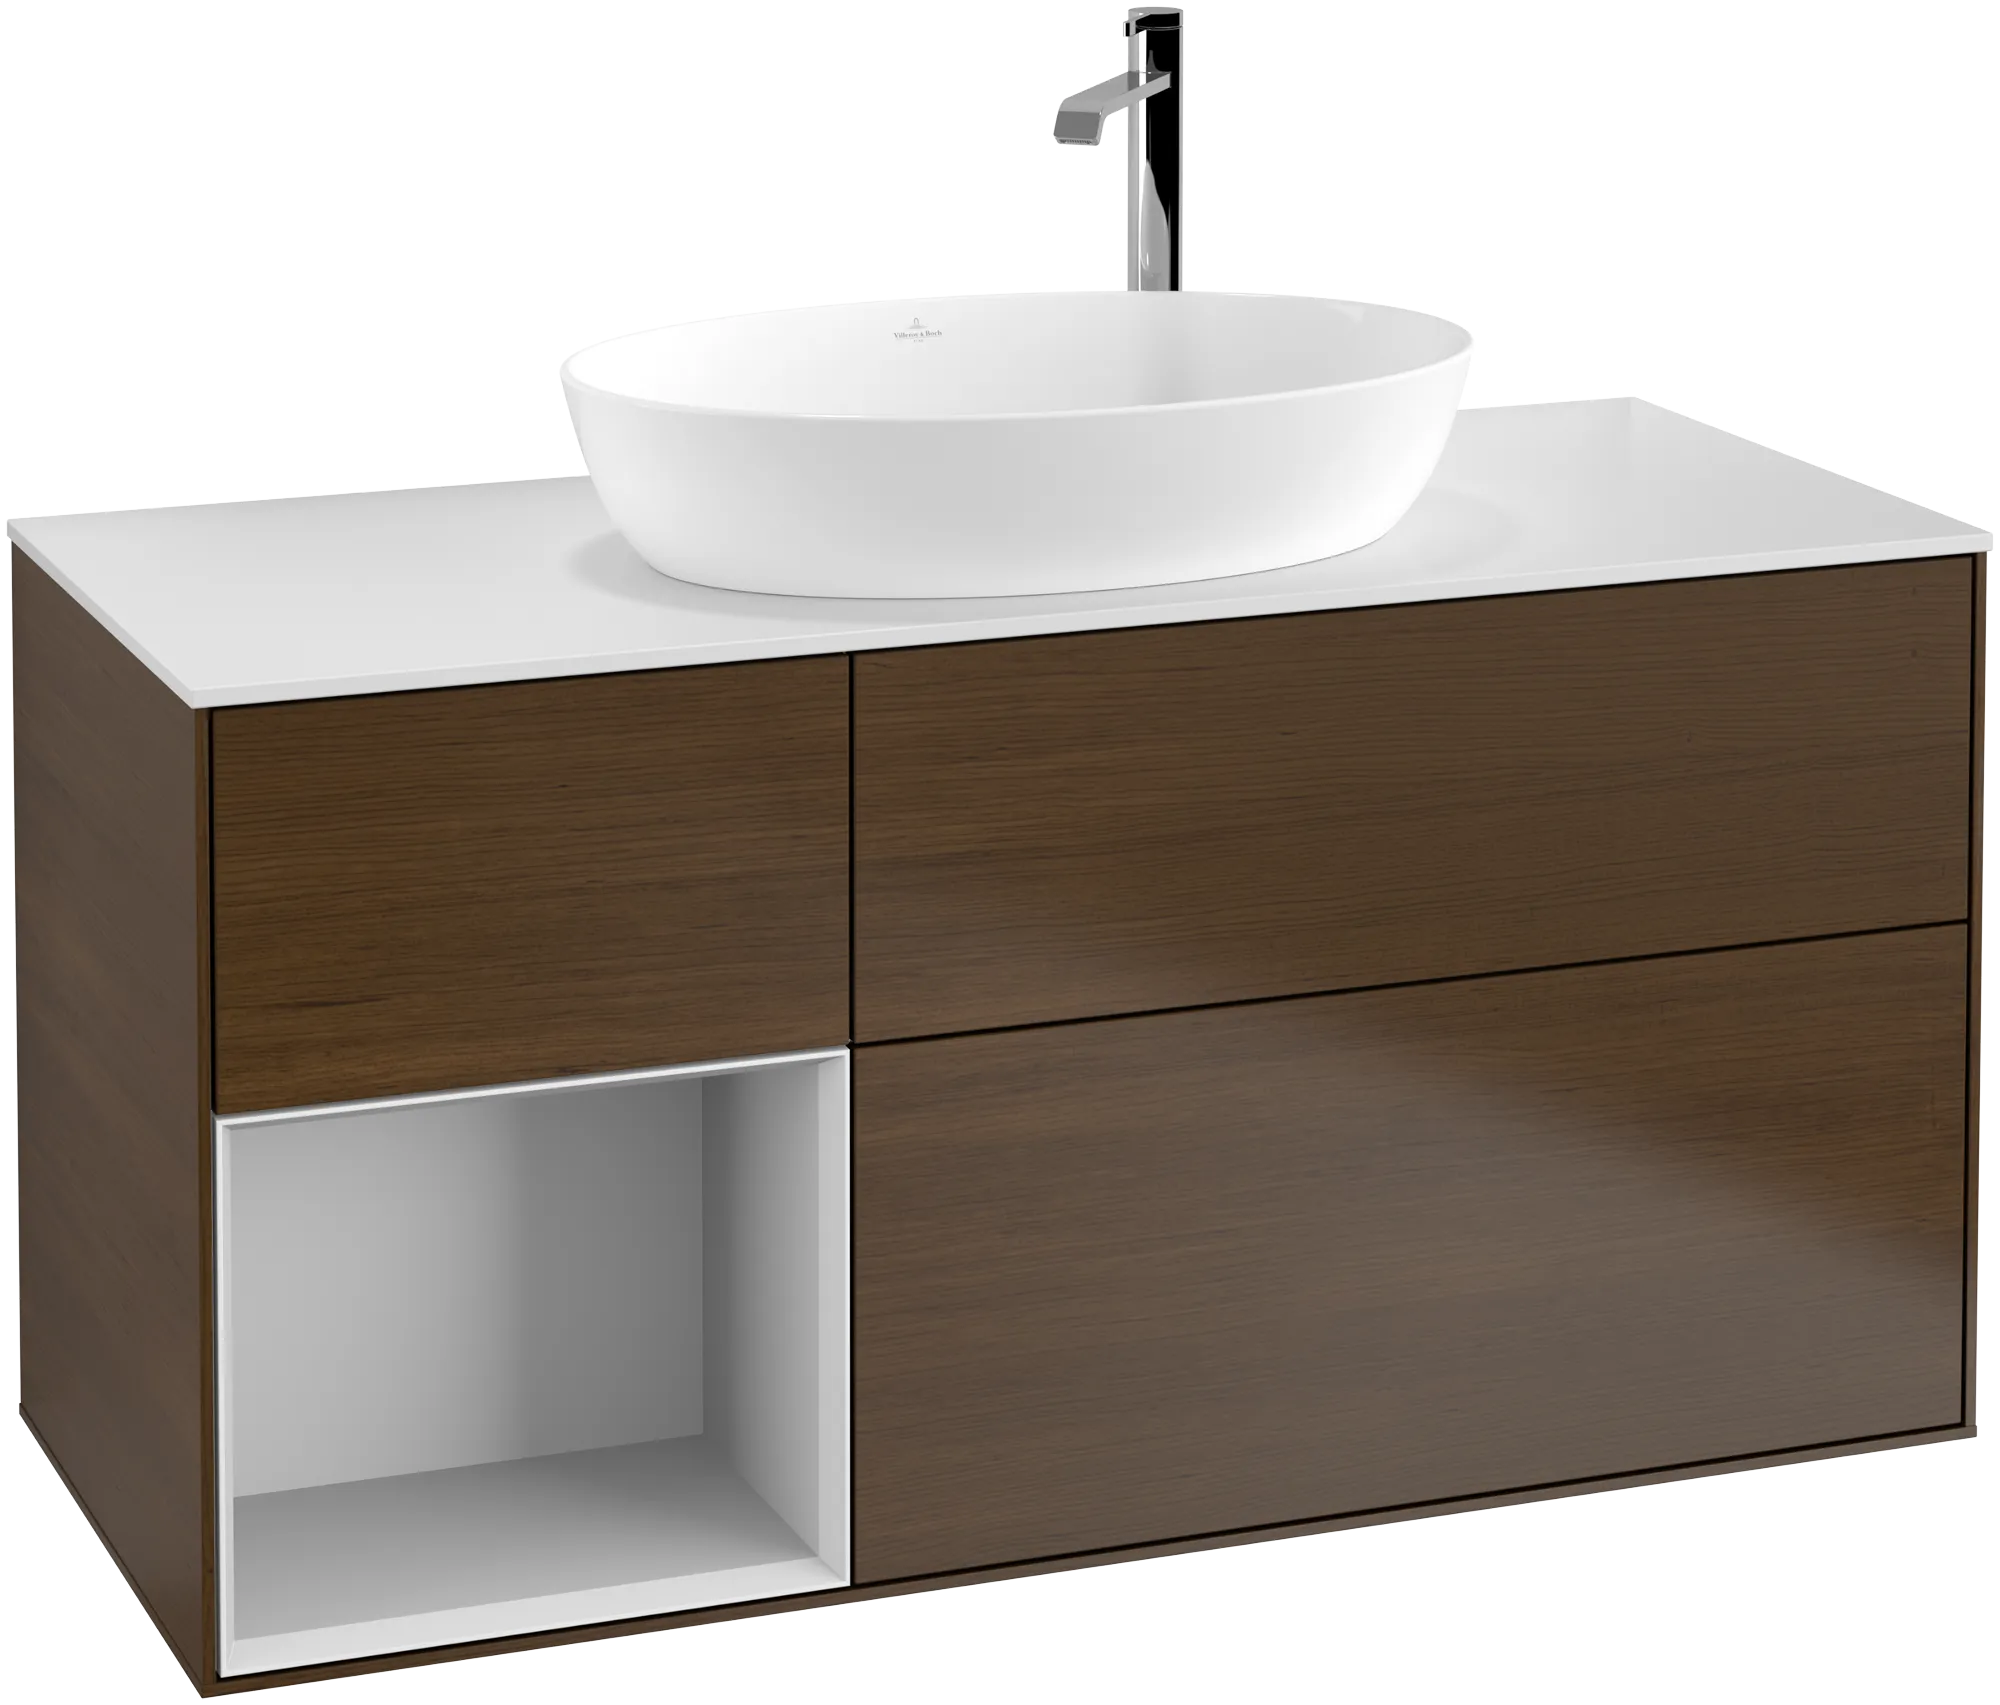 Picture of VILLEROY BOCH Finion Vanity unit, with lighting, 3 pull-out compartments, 1200 x 603 x 501 mm, Walnut Veneer / White Matt Lacquer / Glass White Matt #G941MTGN